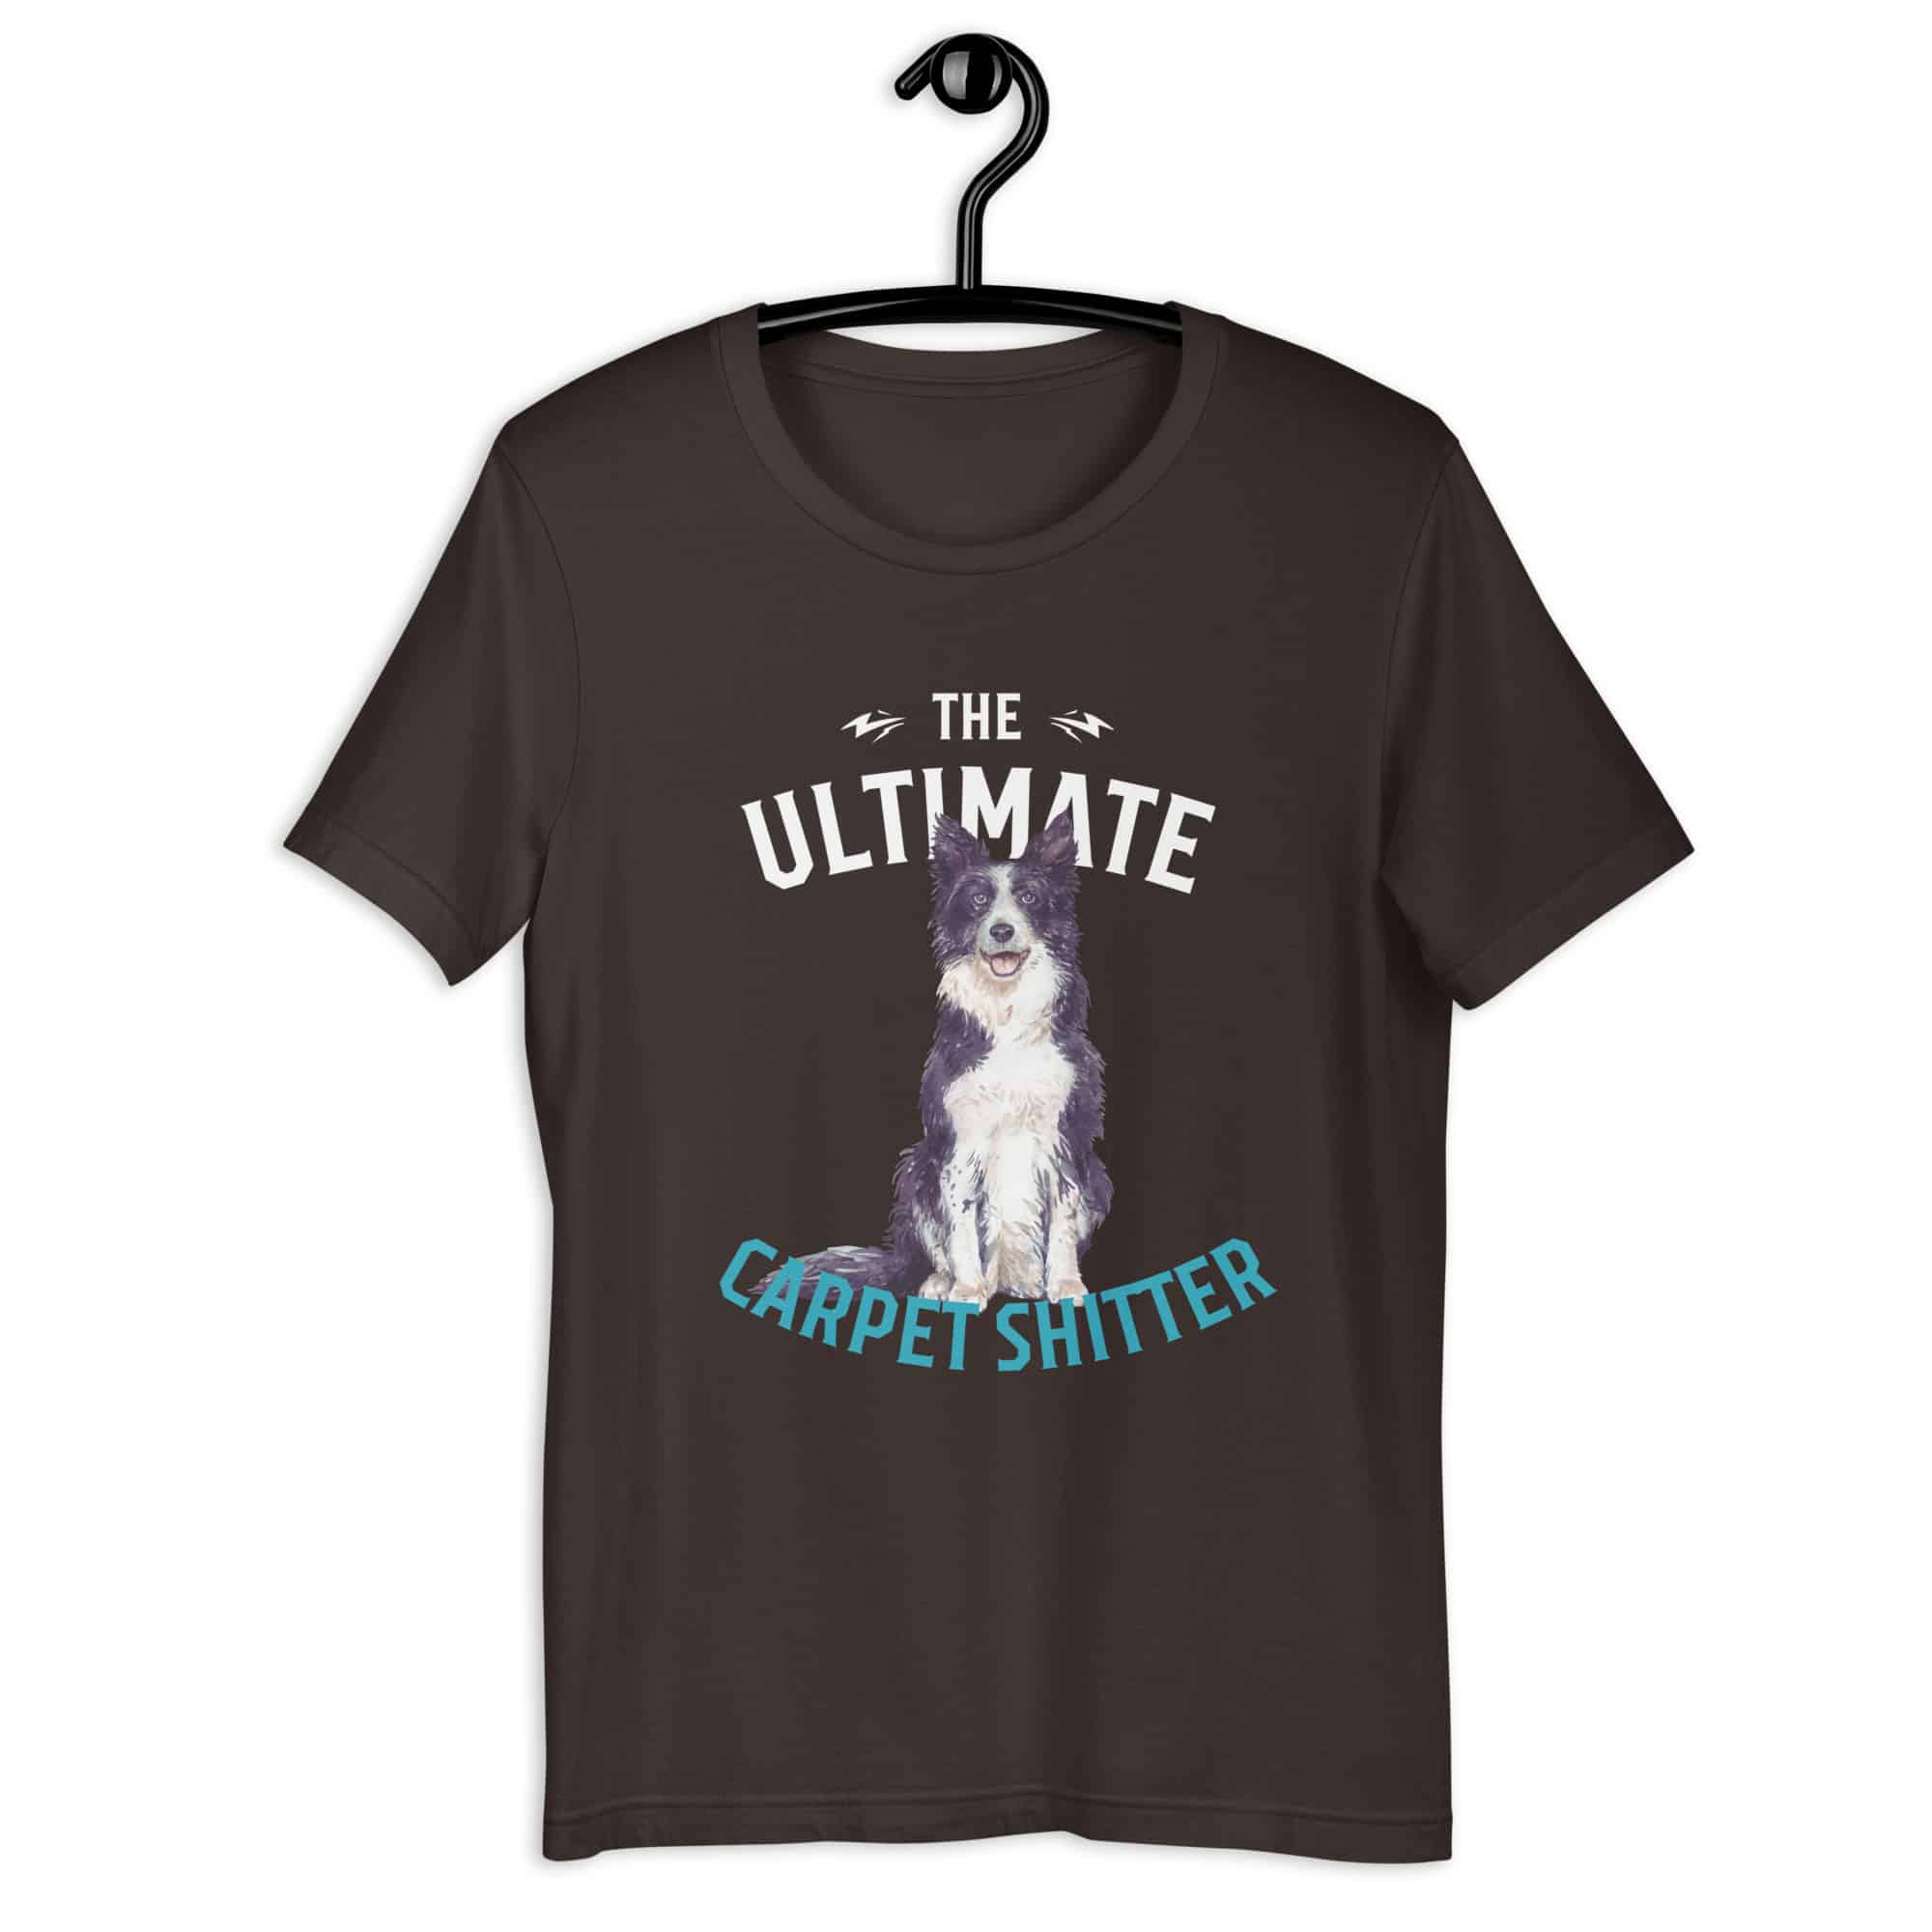 The Ultimate Carpet Shitter Funny Border Collie Unisex T-Shirt brown